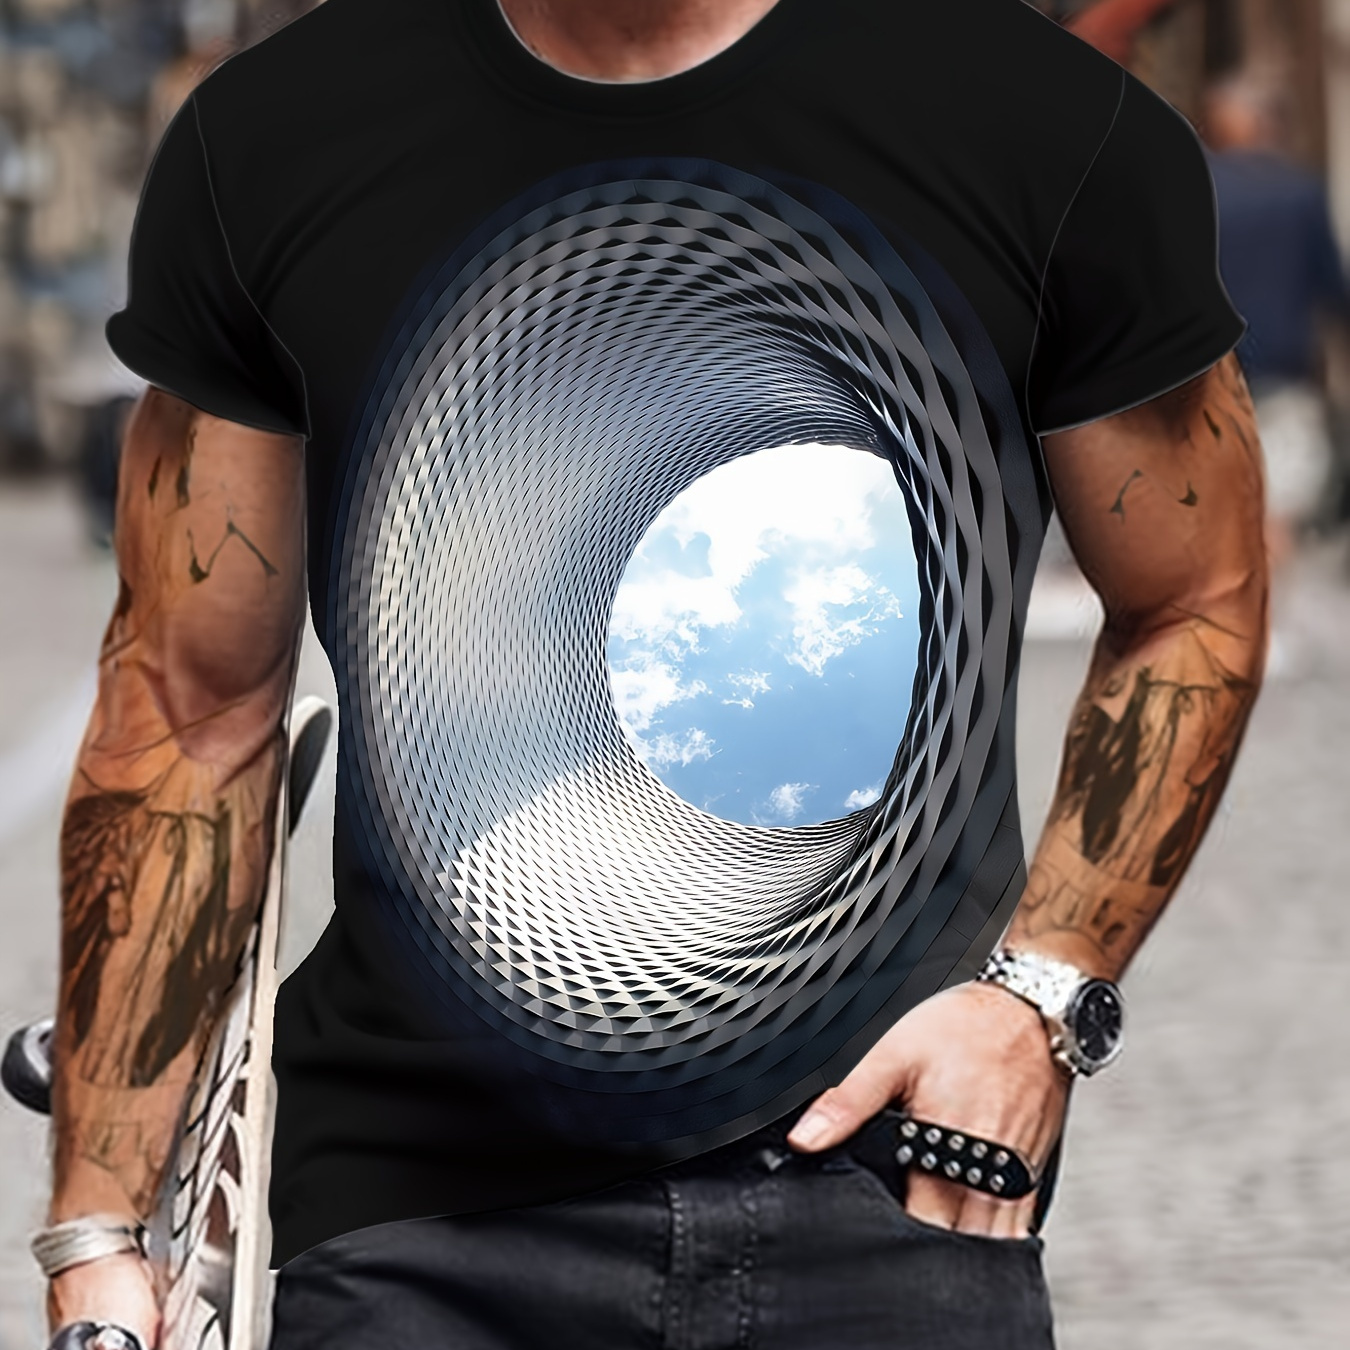 

Men's Summer Fashion T-shirt, 3d Digital Swirling Geometric And Blue Sky Pattern Crew Neck Short Sleeve Tee, Chic And Trendy Tops For Outdoors Wear